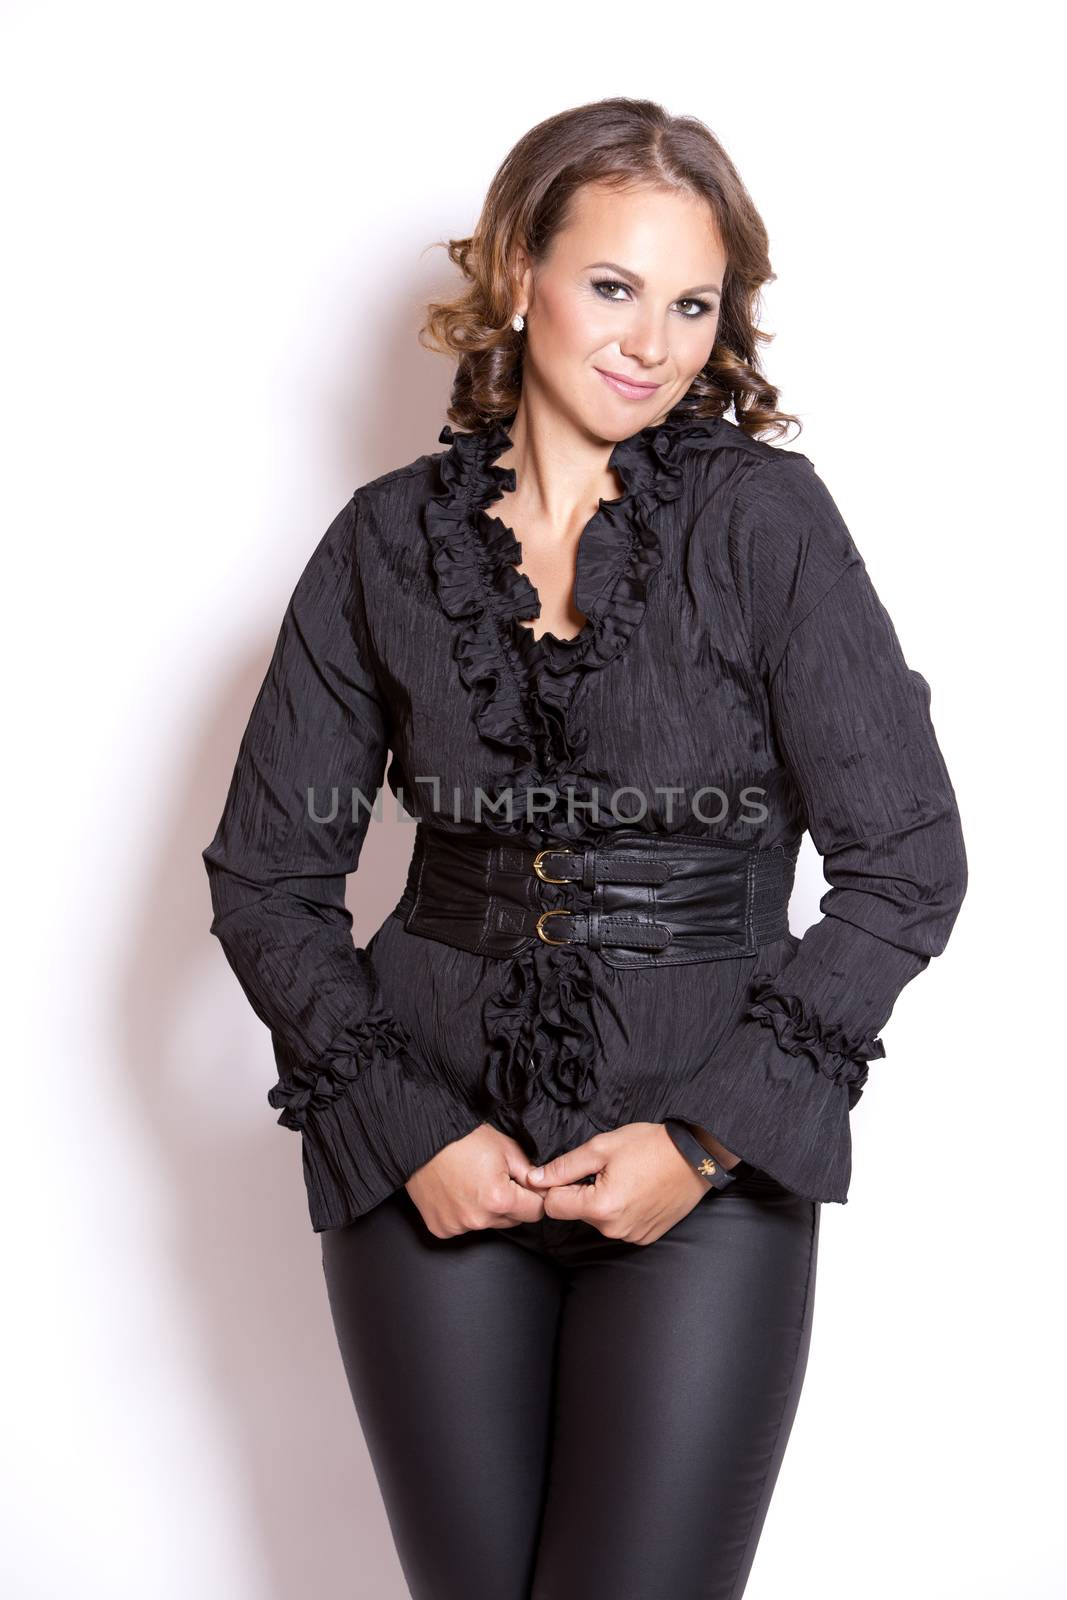 beautiful woman wearing black upscale outfit on white background